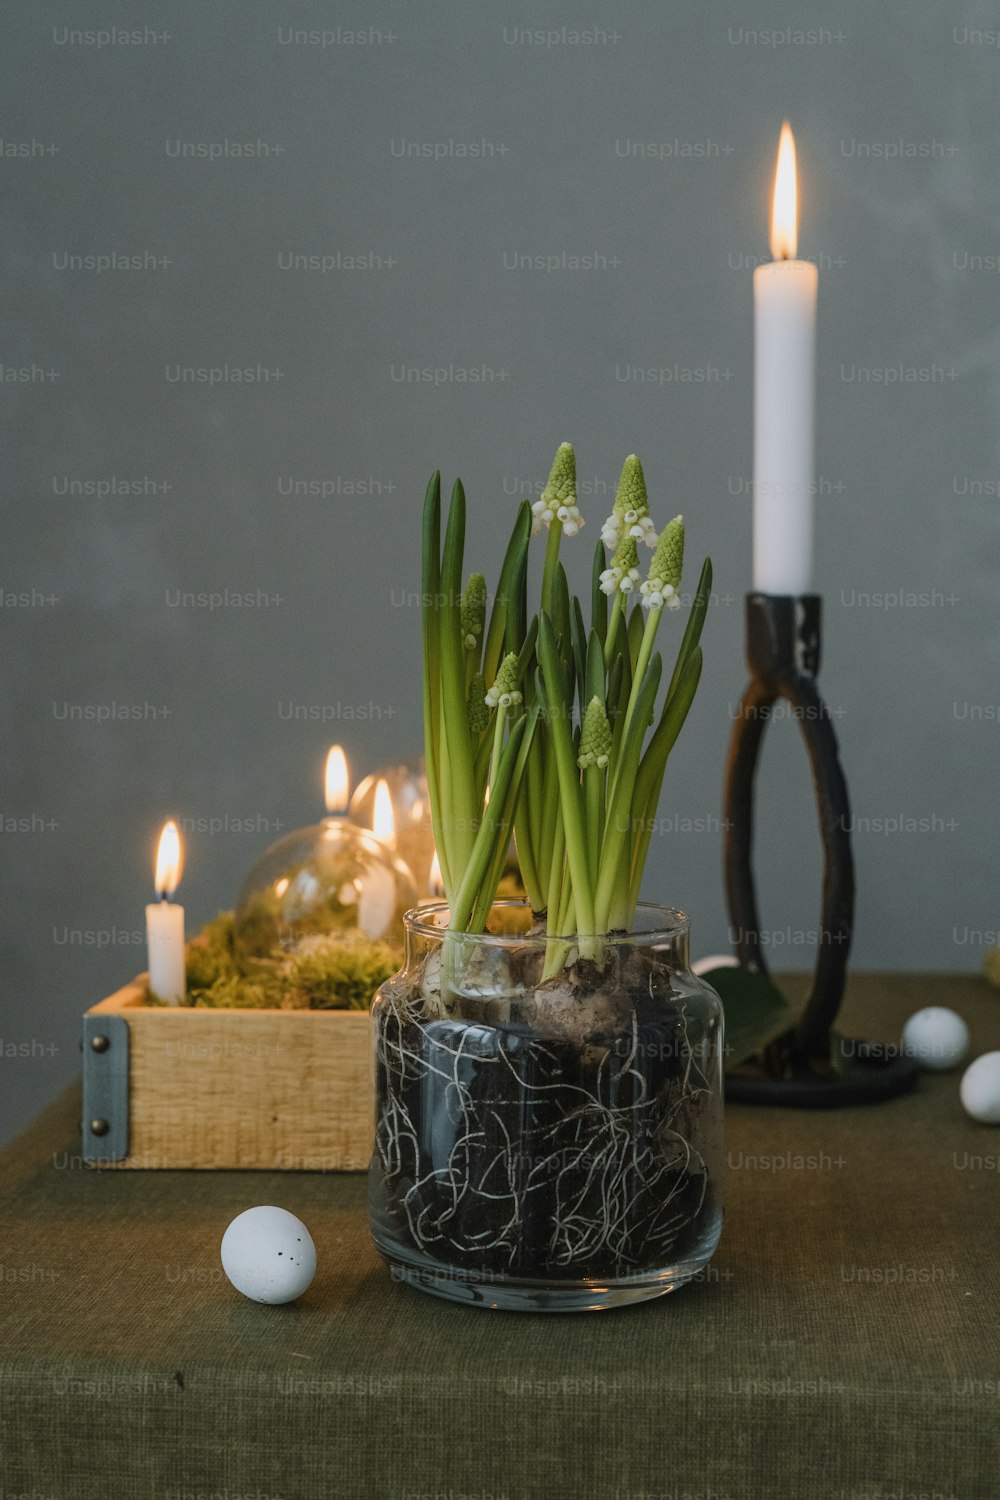 a vase with flowers and candles on a table